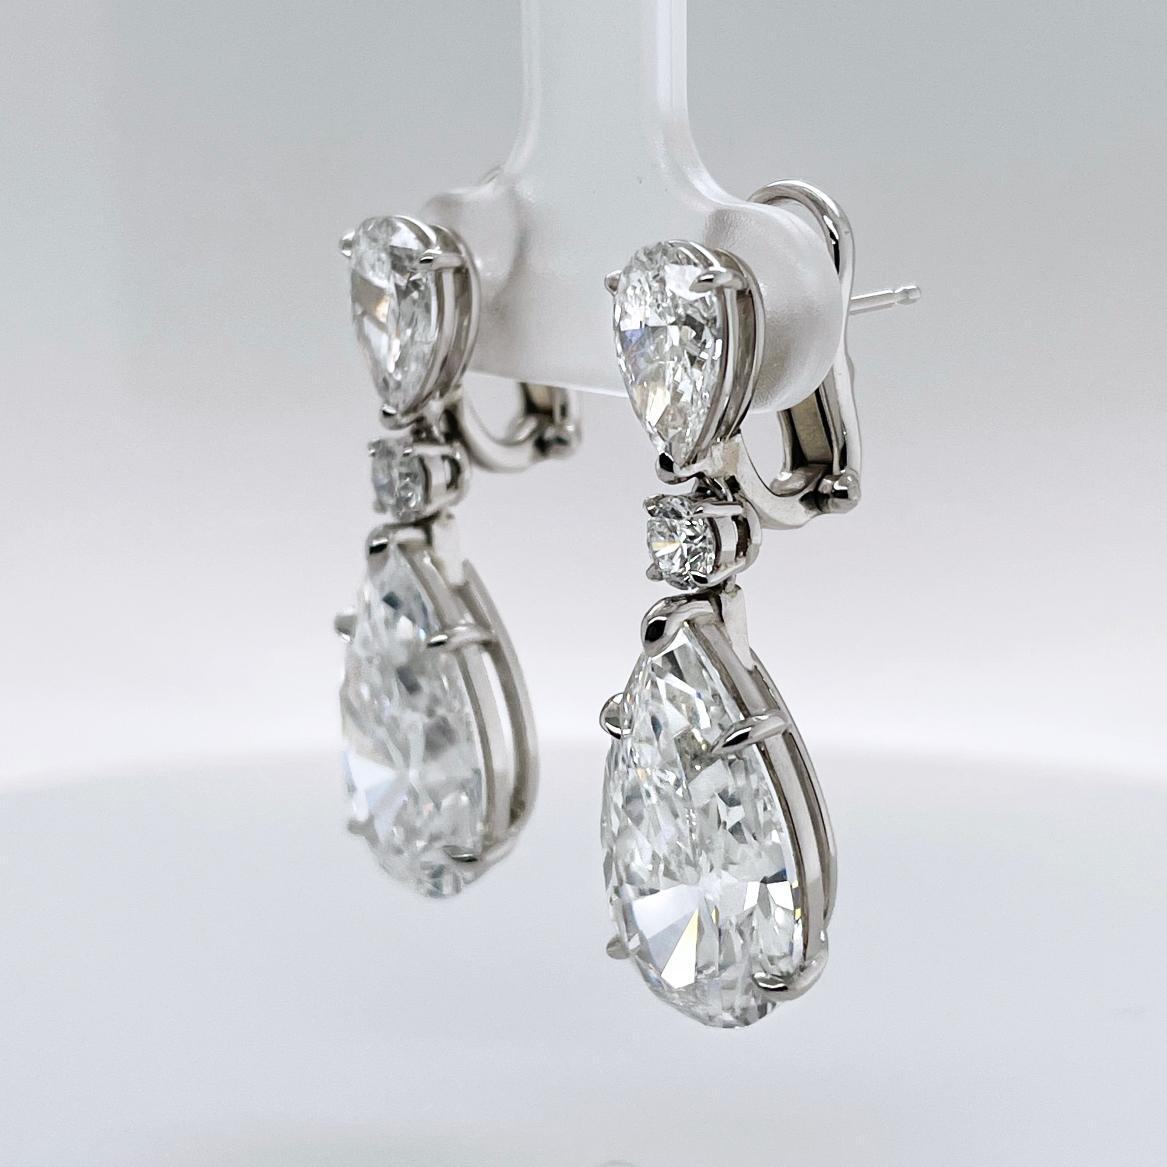 GIA certified Diamond Earrings, over 14.28 Carat total weight.
5.85 and 6.43 carat Pear Shaped Diamonds topped with Round diamonds and 1.00 carat Pear Shaped Diamonds

Accompanied by GIA reports:
5.85 Carat PS: GIA 2211602257 stating that the